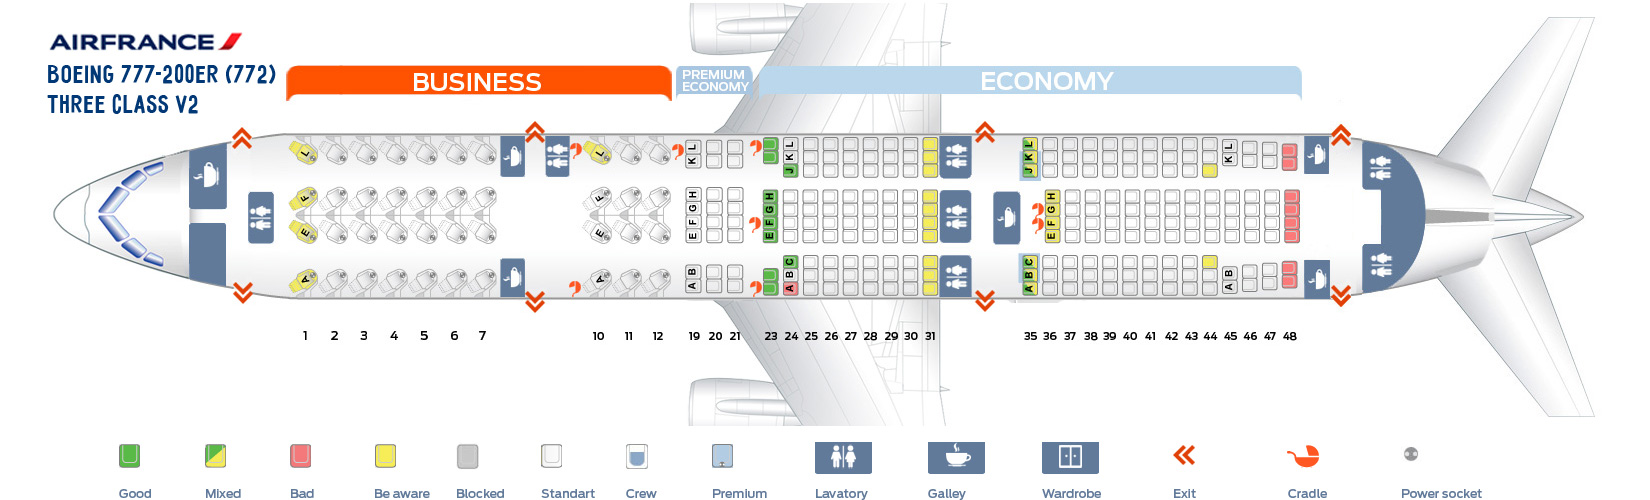 seat assignment air france